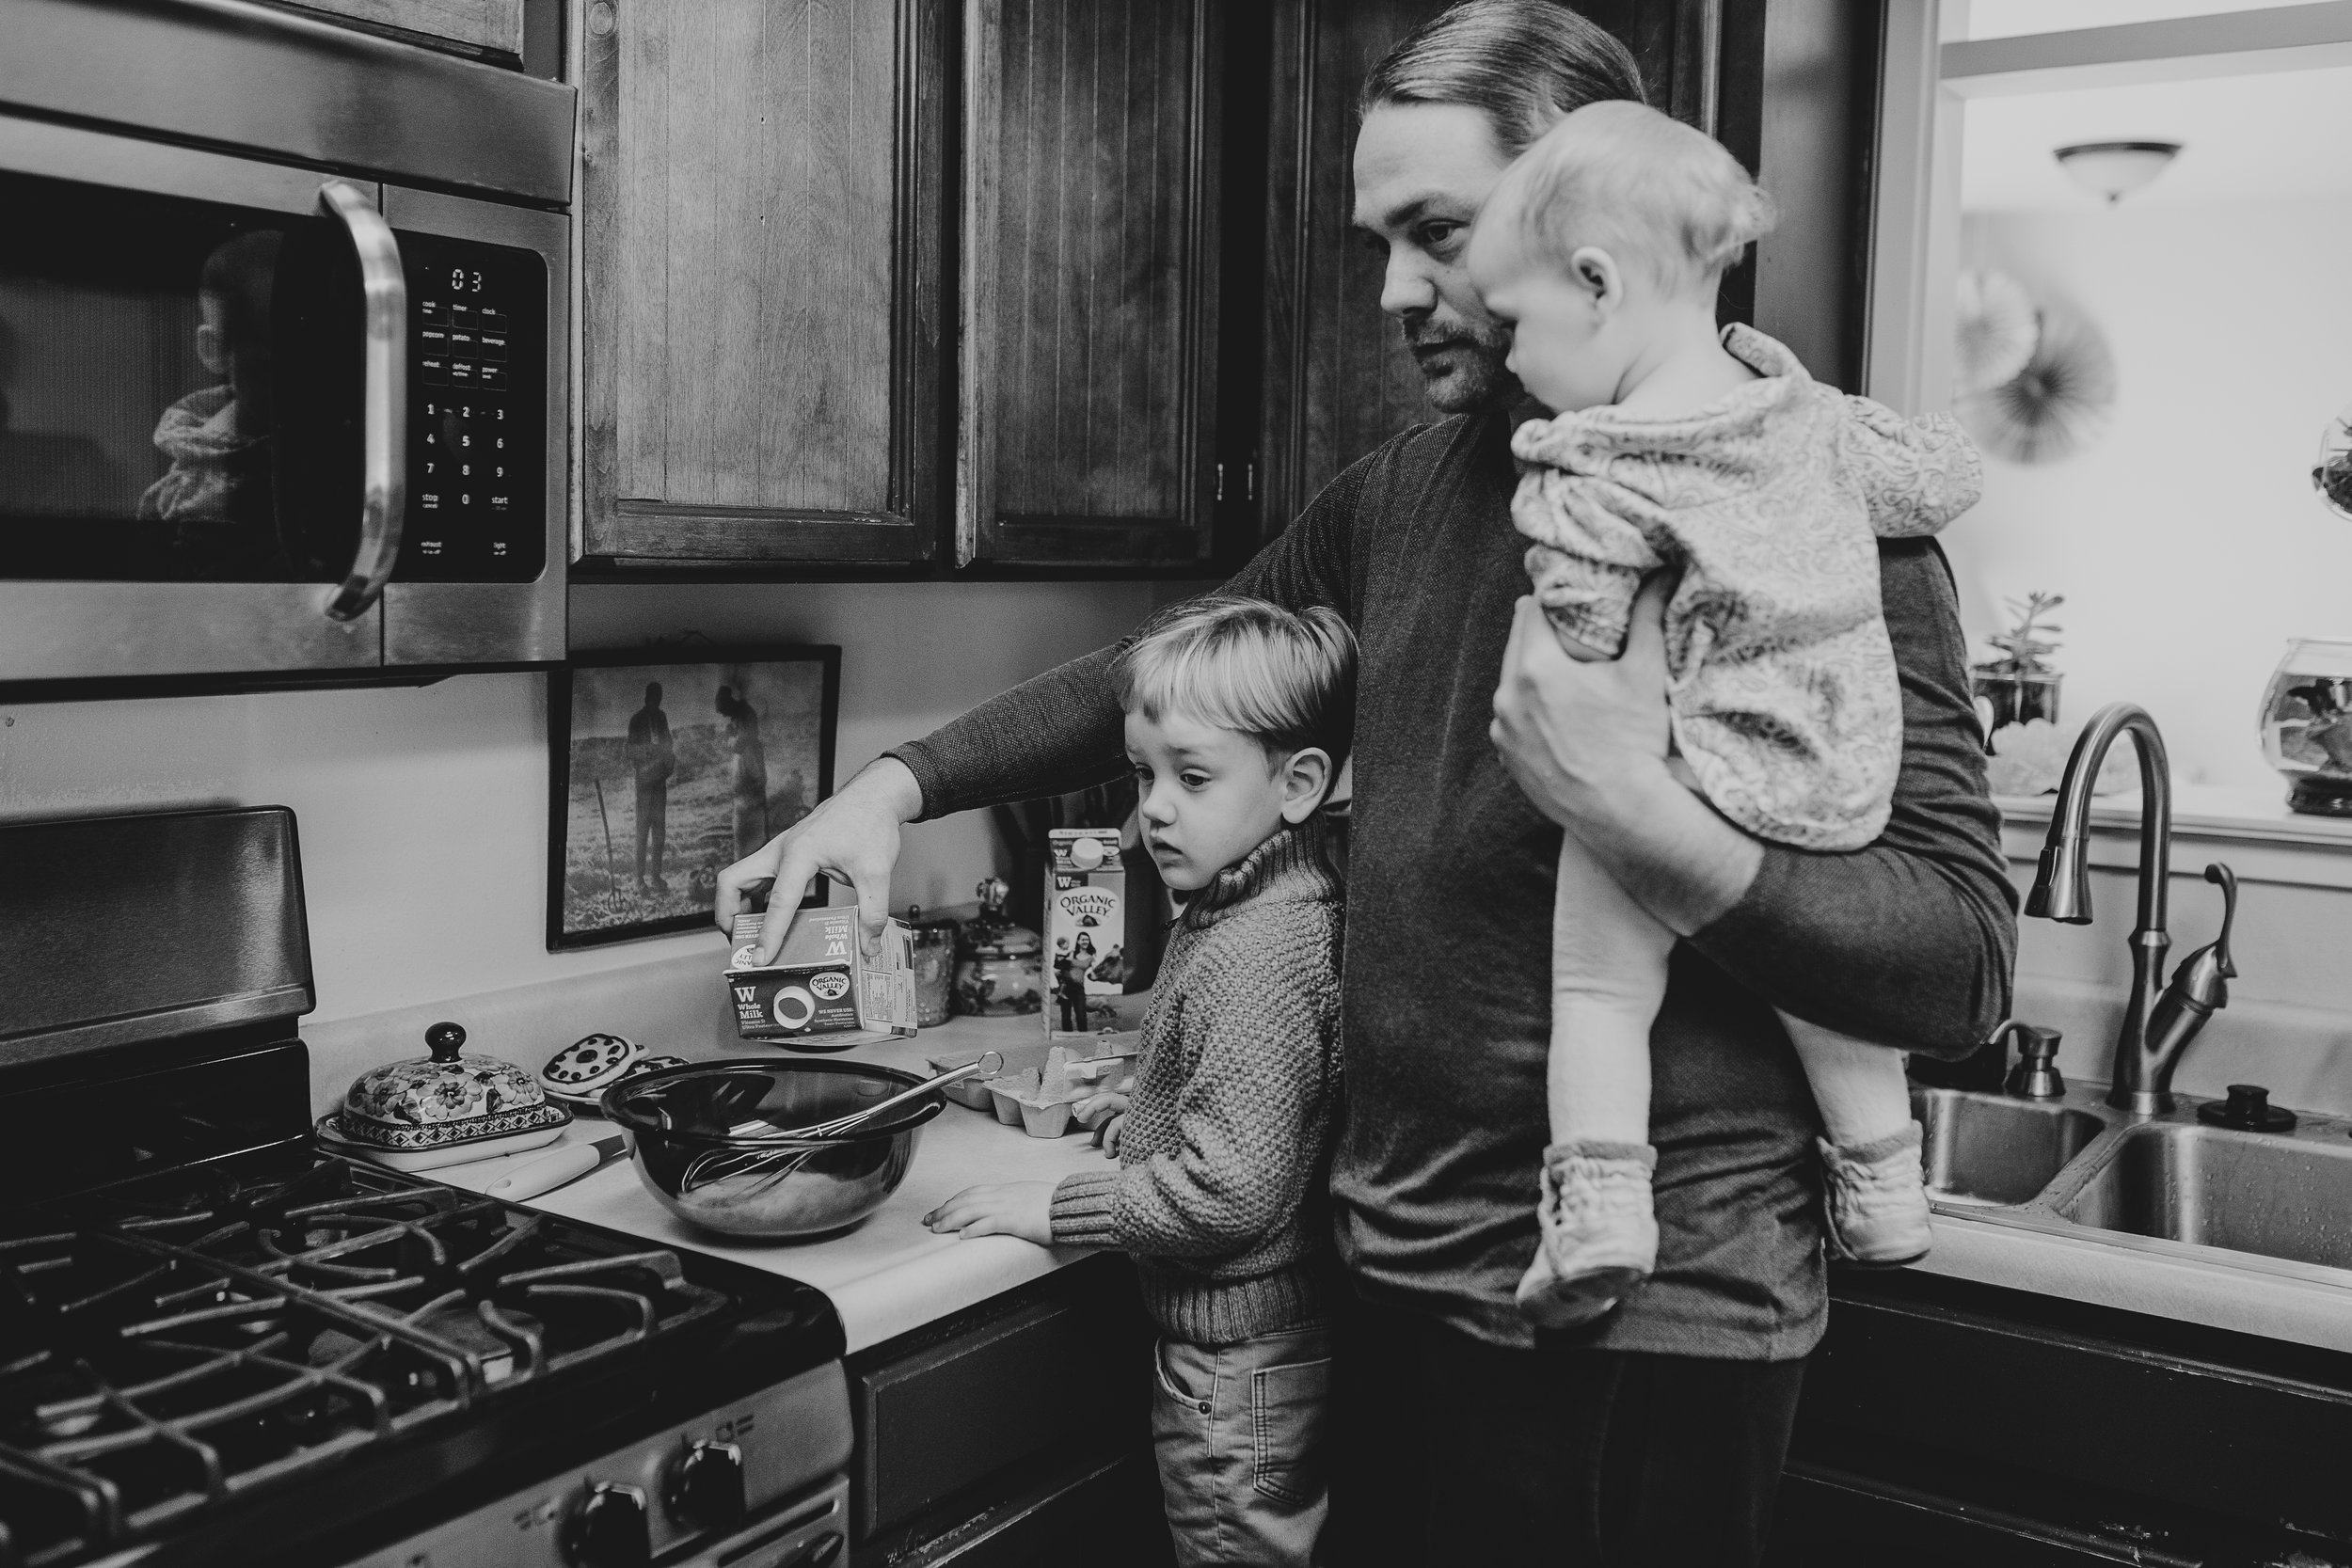  Dad and kids making breakfast 